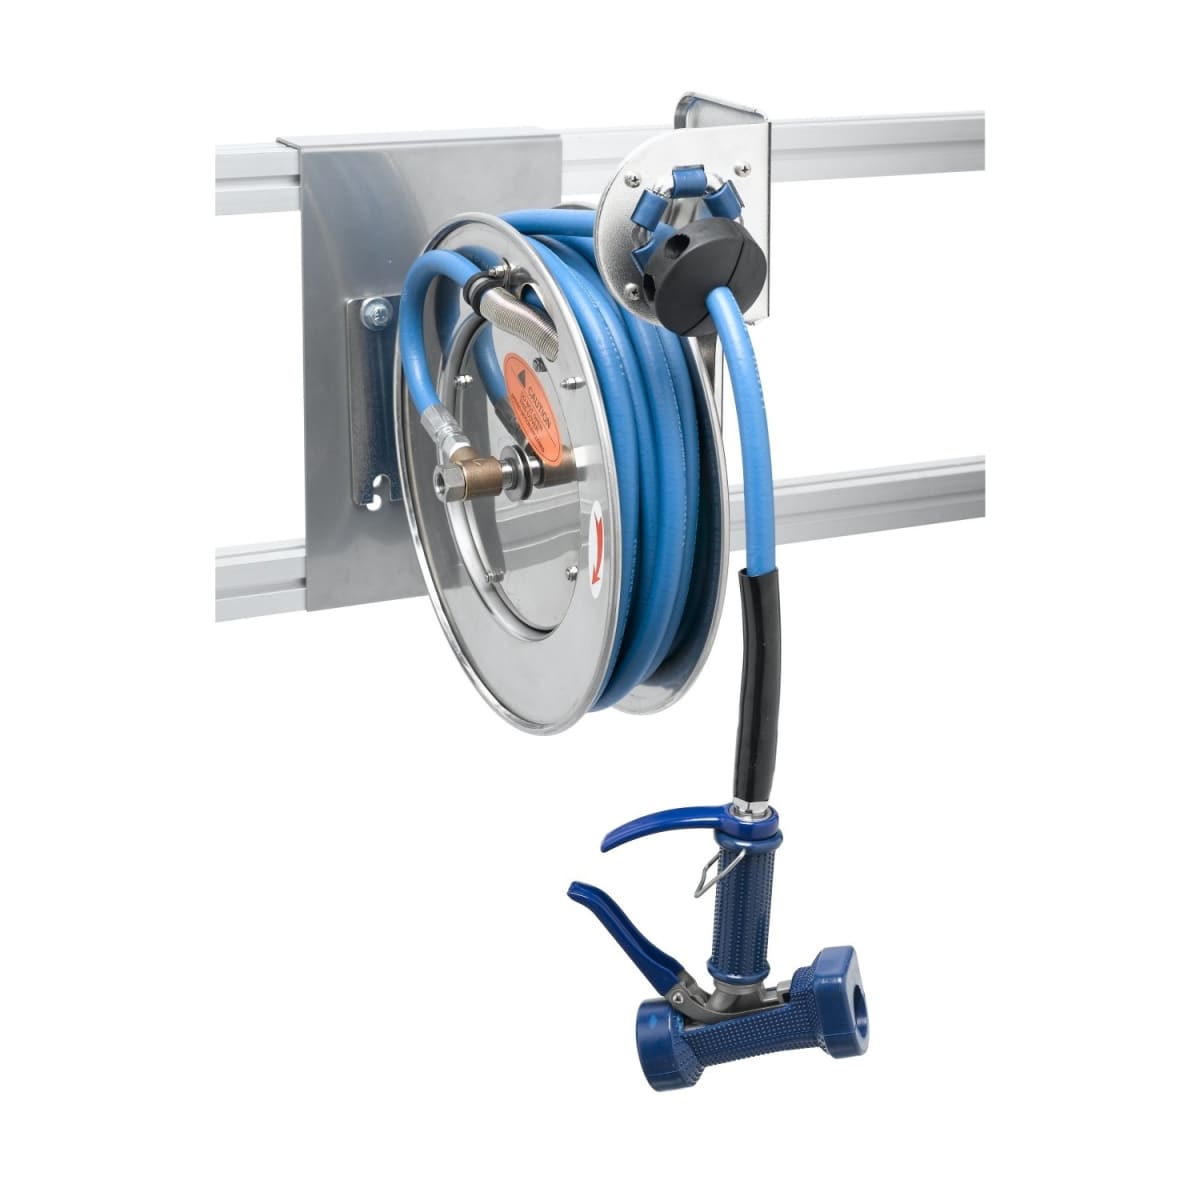 T&S B-7142-10 50' Open Stainless Steel Hose Reel with EB-2322